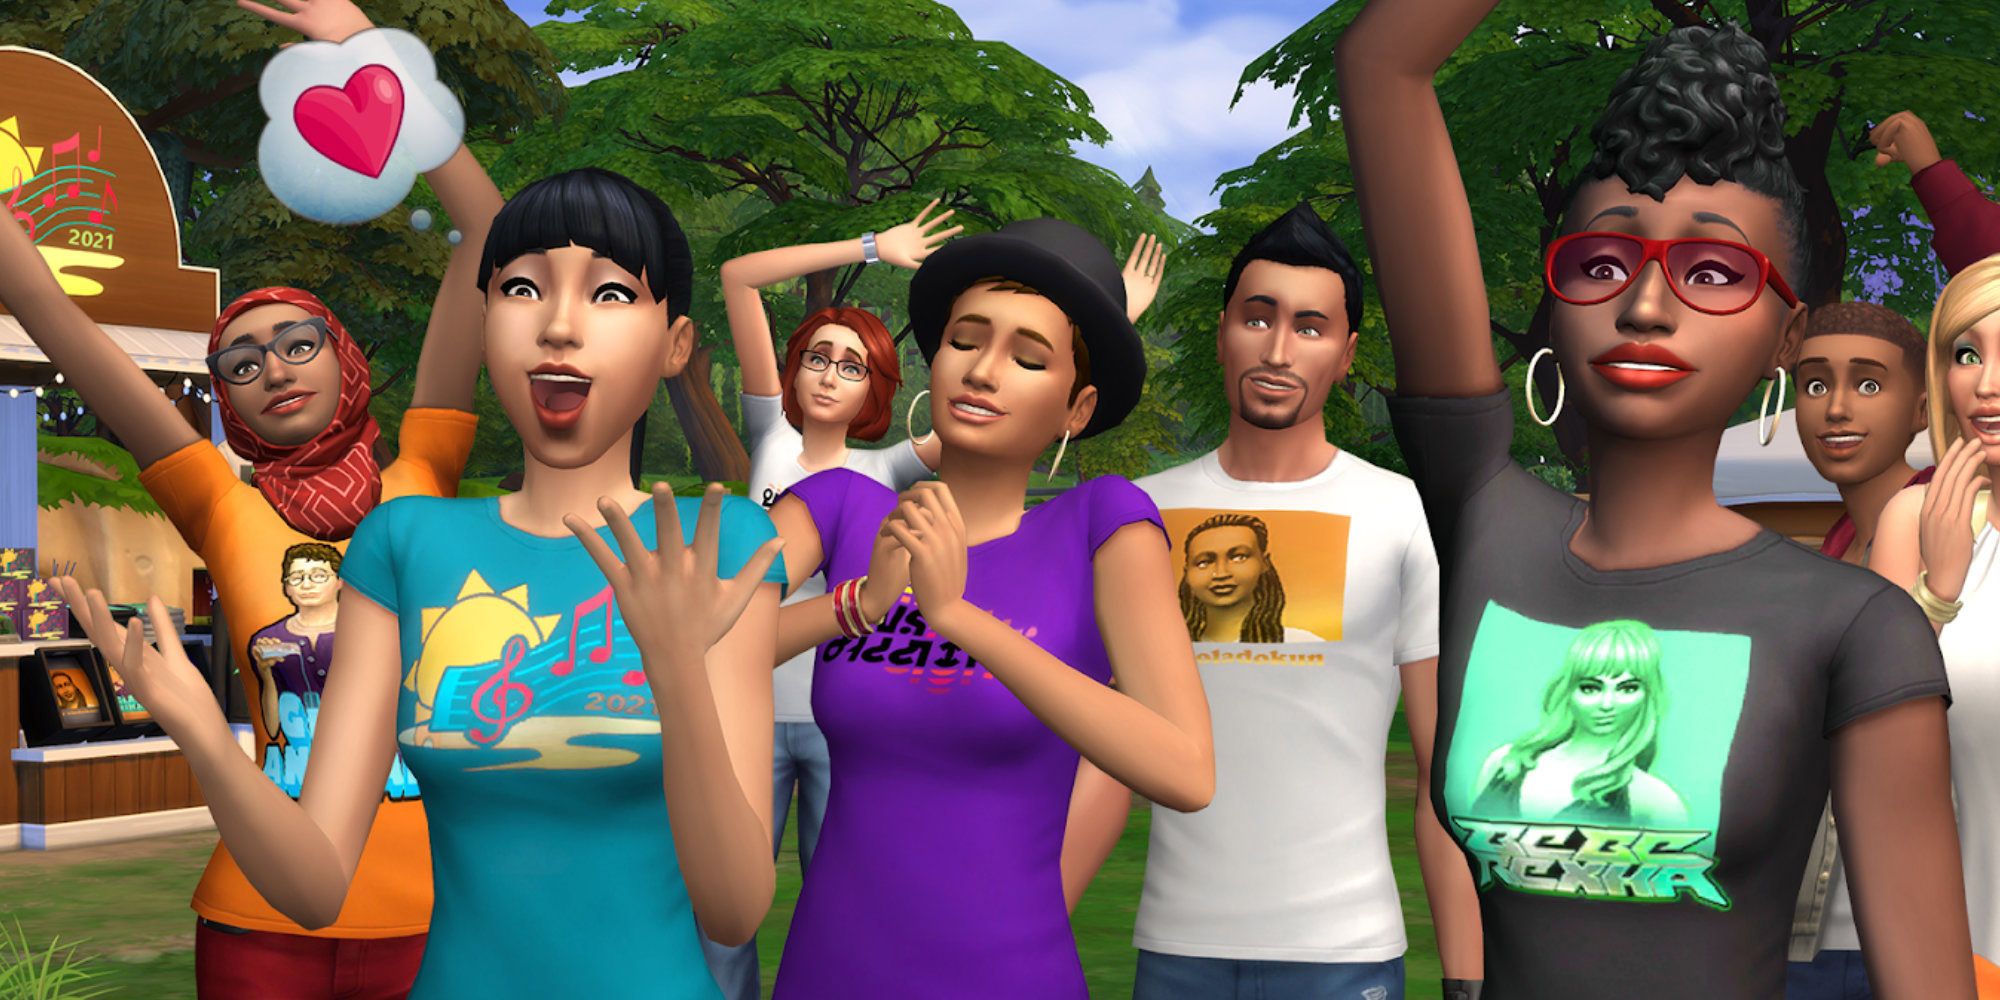 Some excited mutts in The Sims 4